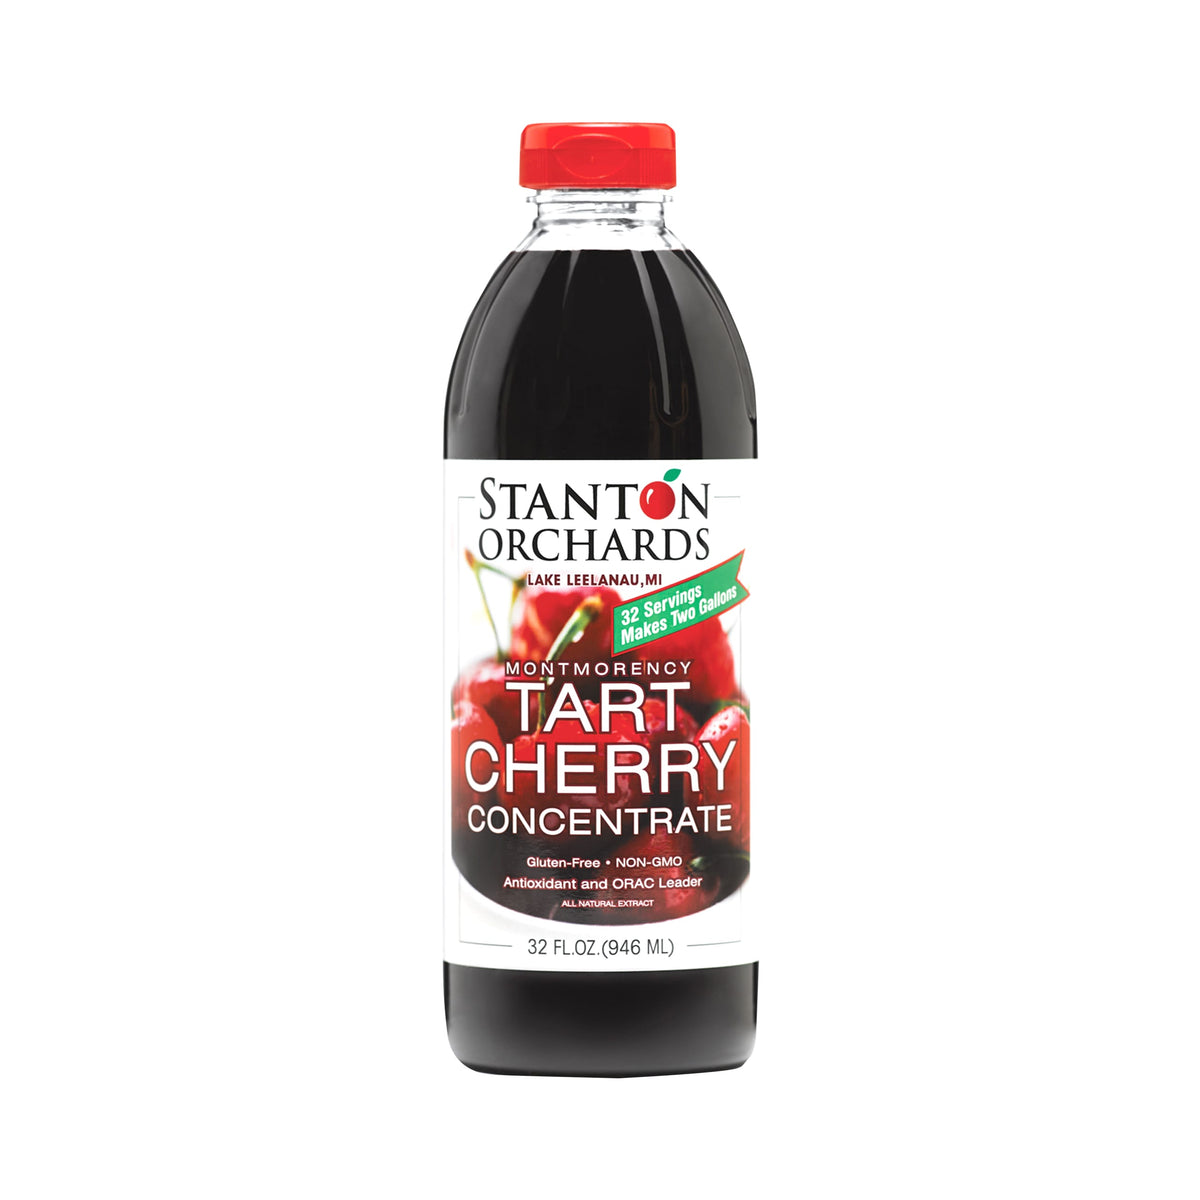 32 oz. Bottle of Stanton Orchards Tart Cherry Concentrate